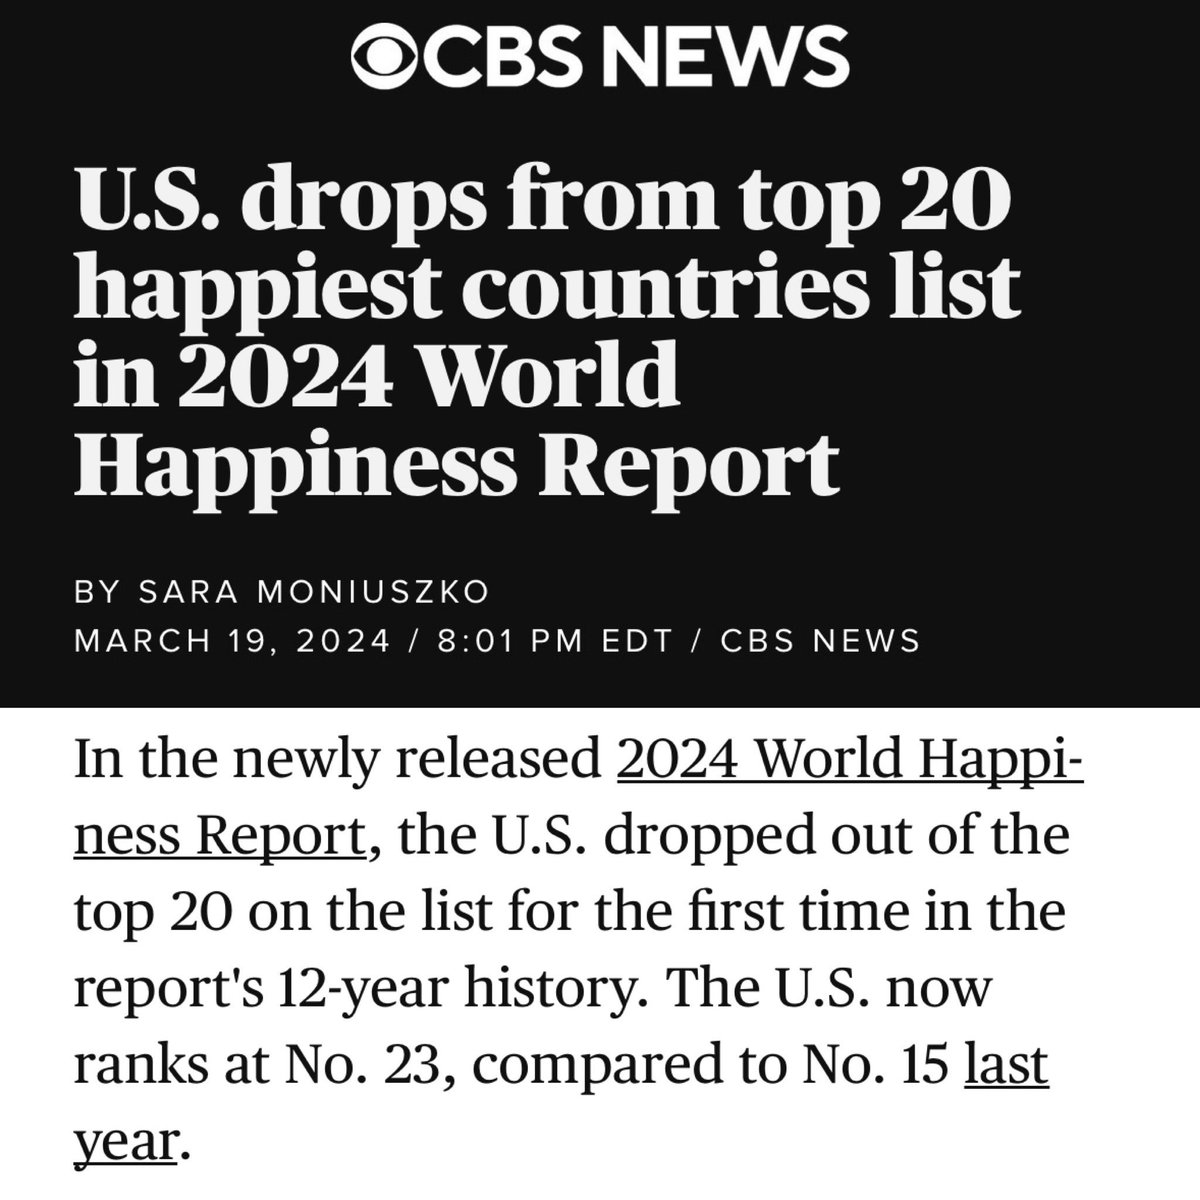 Do you know what the 22 countries ranked ahead of the U.S. in happiness all have in common? Universal healthcare. Turns out people are happier when they don’t have to choose between food and seeing a doctor.